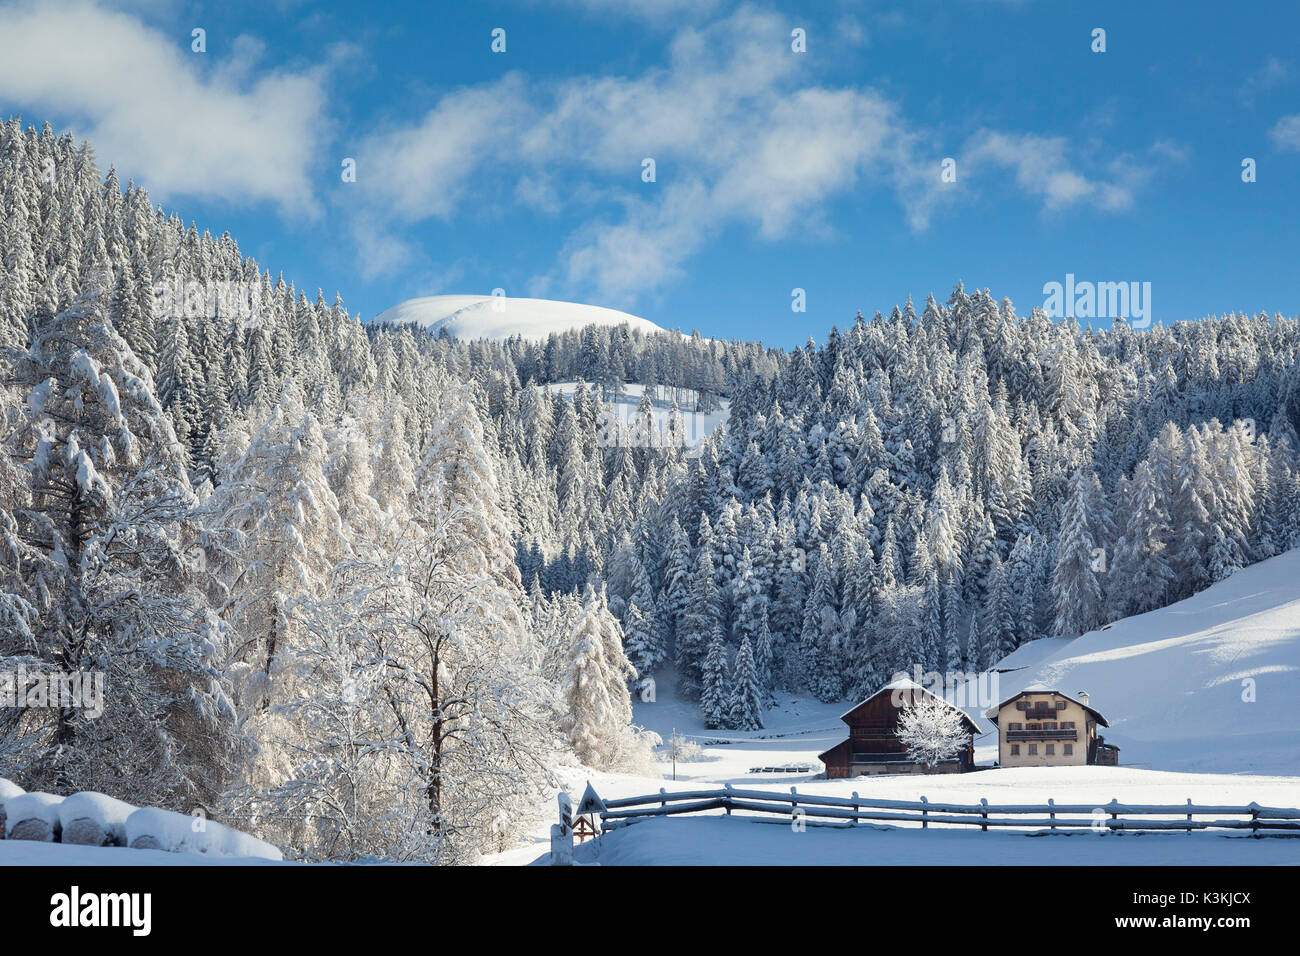 a view of a typical Villnöss surroundings after a snowfall with an old farmstead in the background, Villnöss, Bolzano province, South Tyrol, Trentino Alto Adige, Italy, Europe Stock Photo